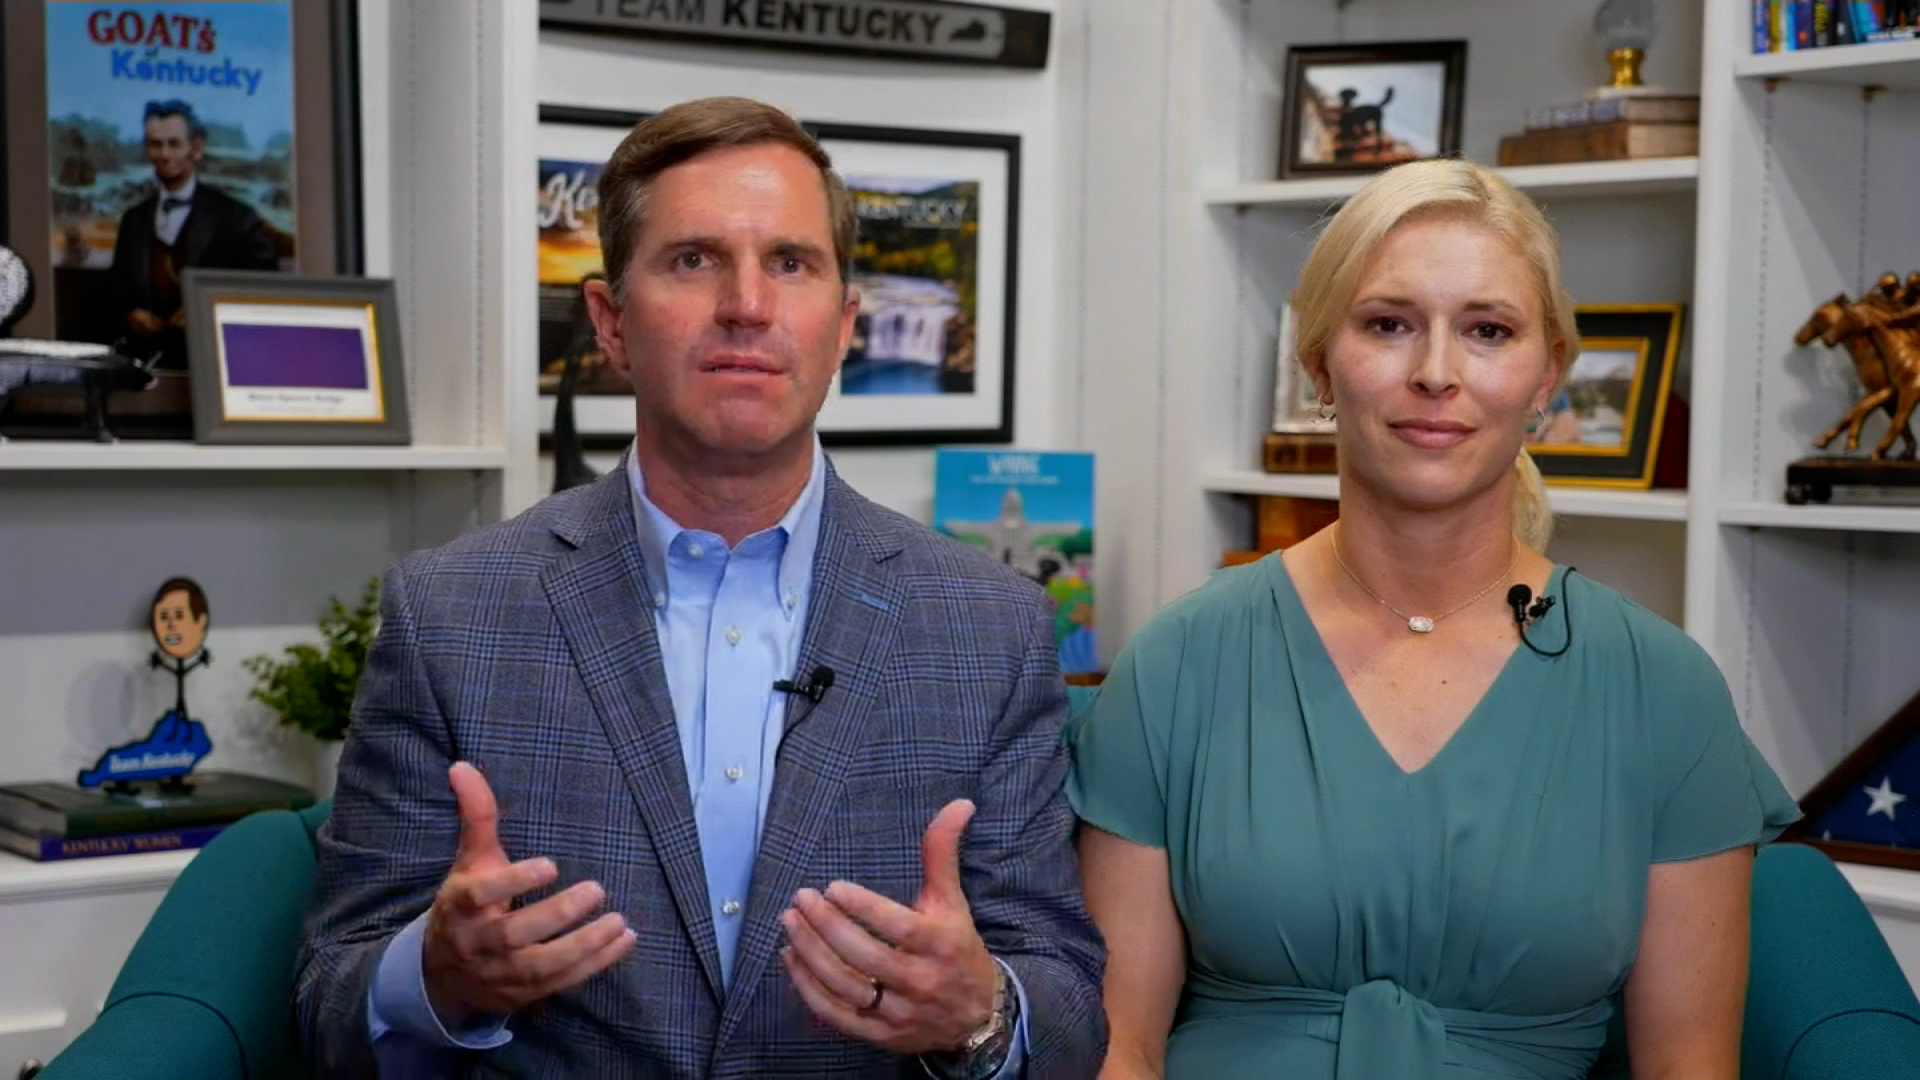 Andy Beshear and his wife, Britainy, are pictured during an interview with CNN’s Kate Bouldan on November 8.